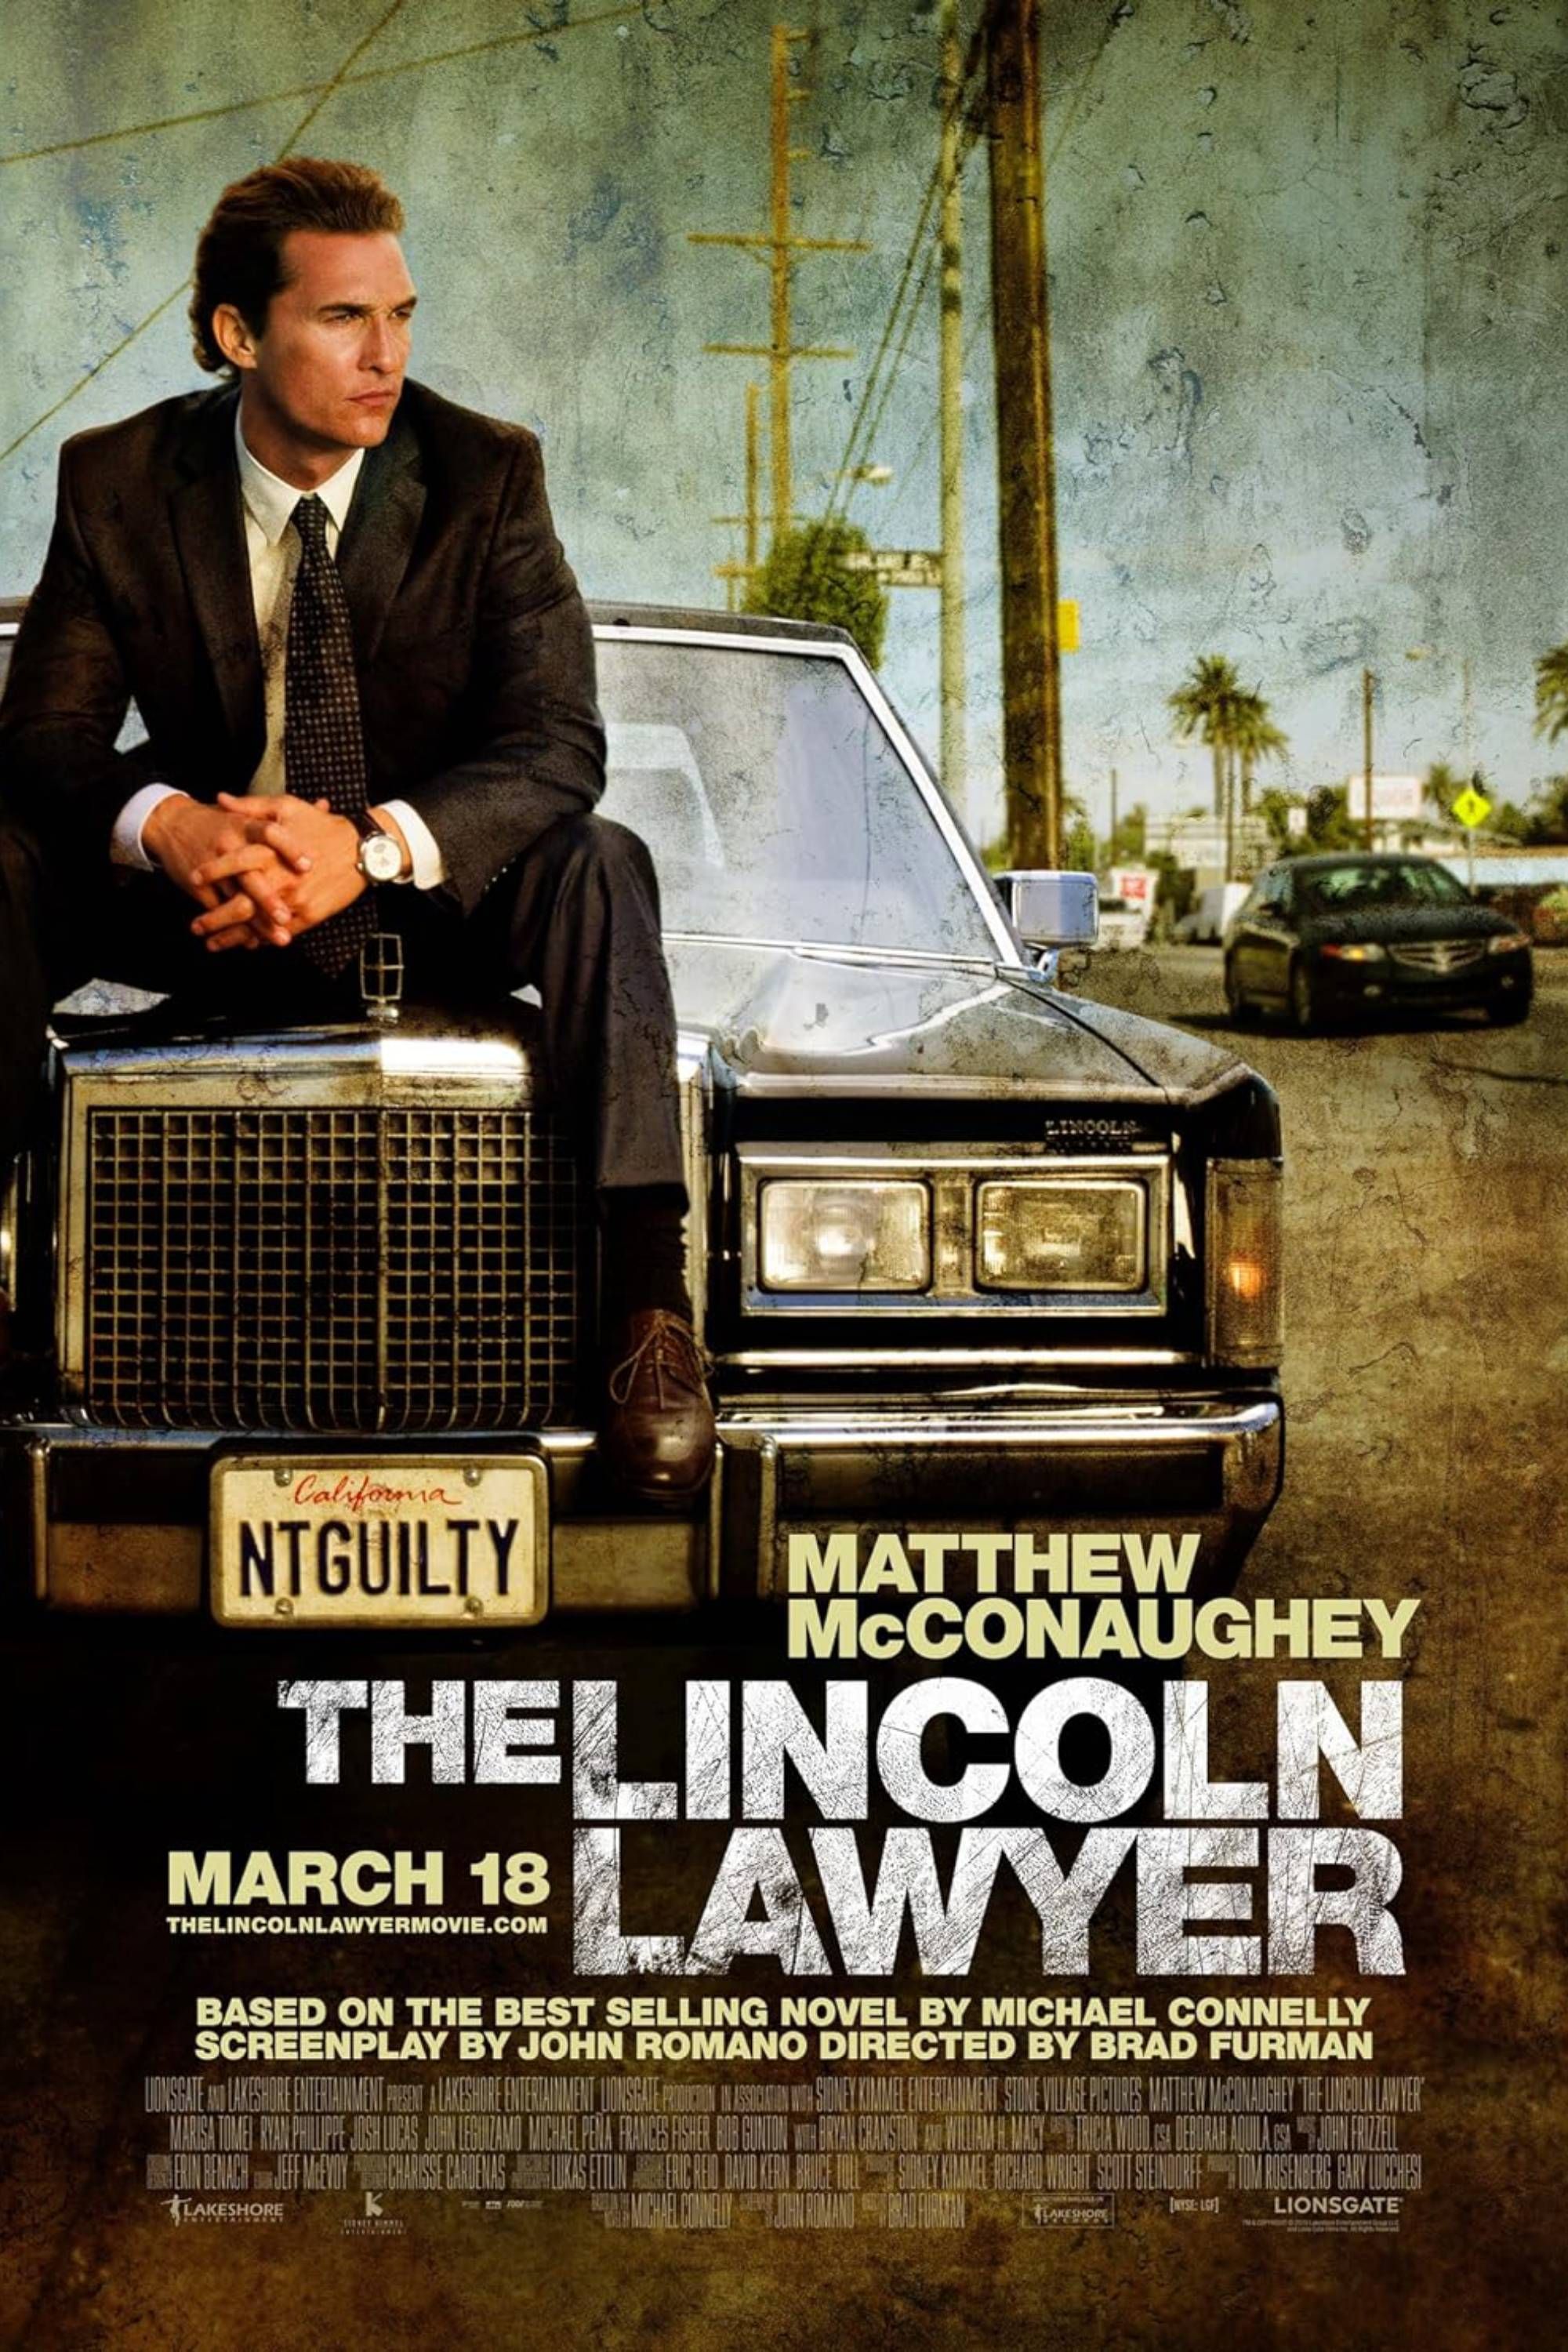 The Lincoln Lawyer (2011) - Poster - Mathew McConaughey